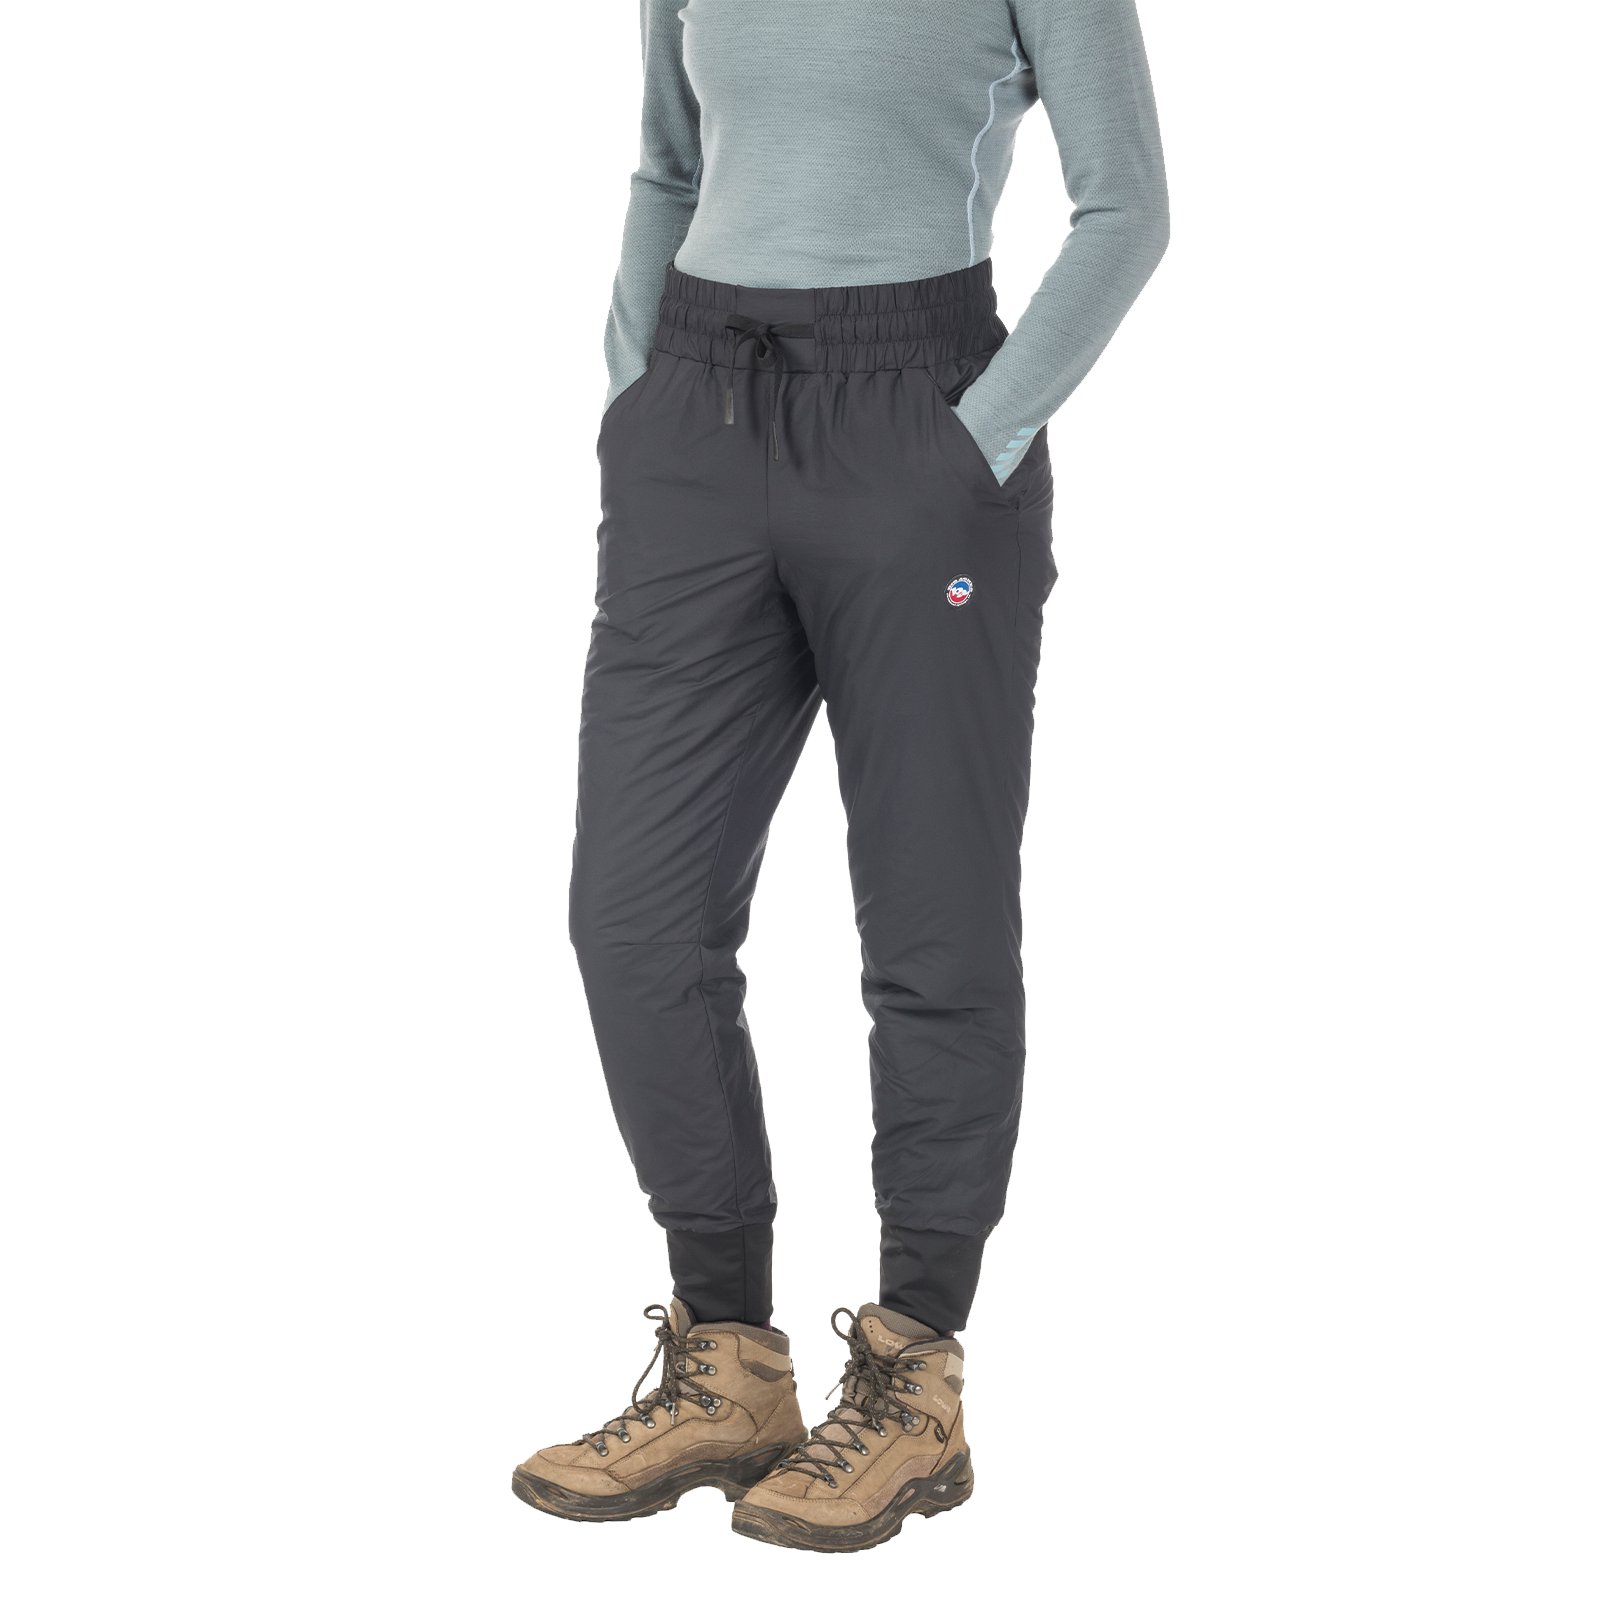 Upgraded Bear Ladies Thermal Underwear Sets Set Plus Size, Thin Section,  Long Pants Suit For Womens Body Bottoming In Autumn From Alymall, $20.05